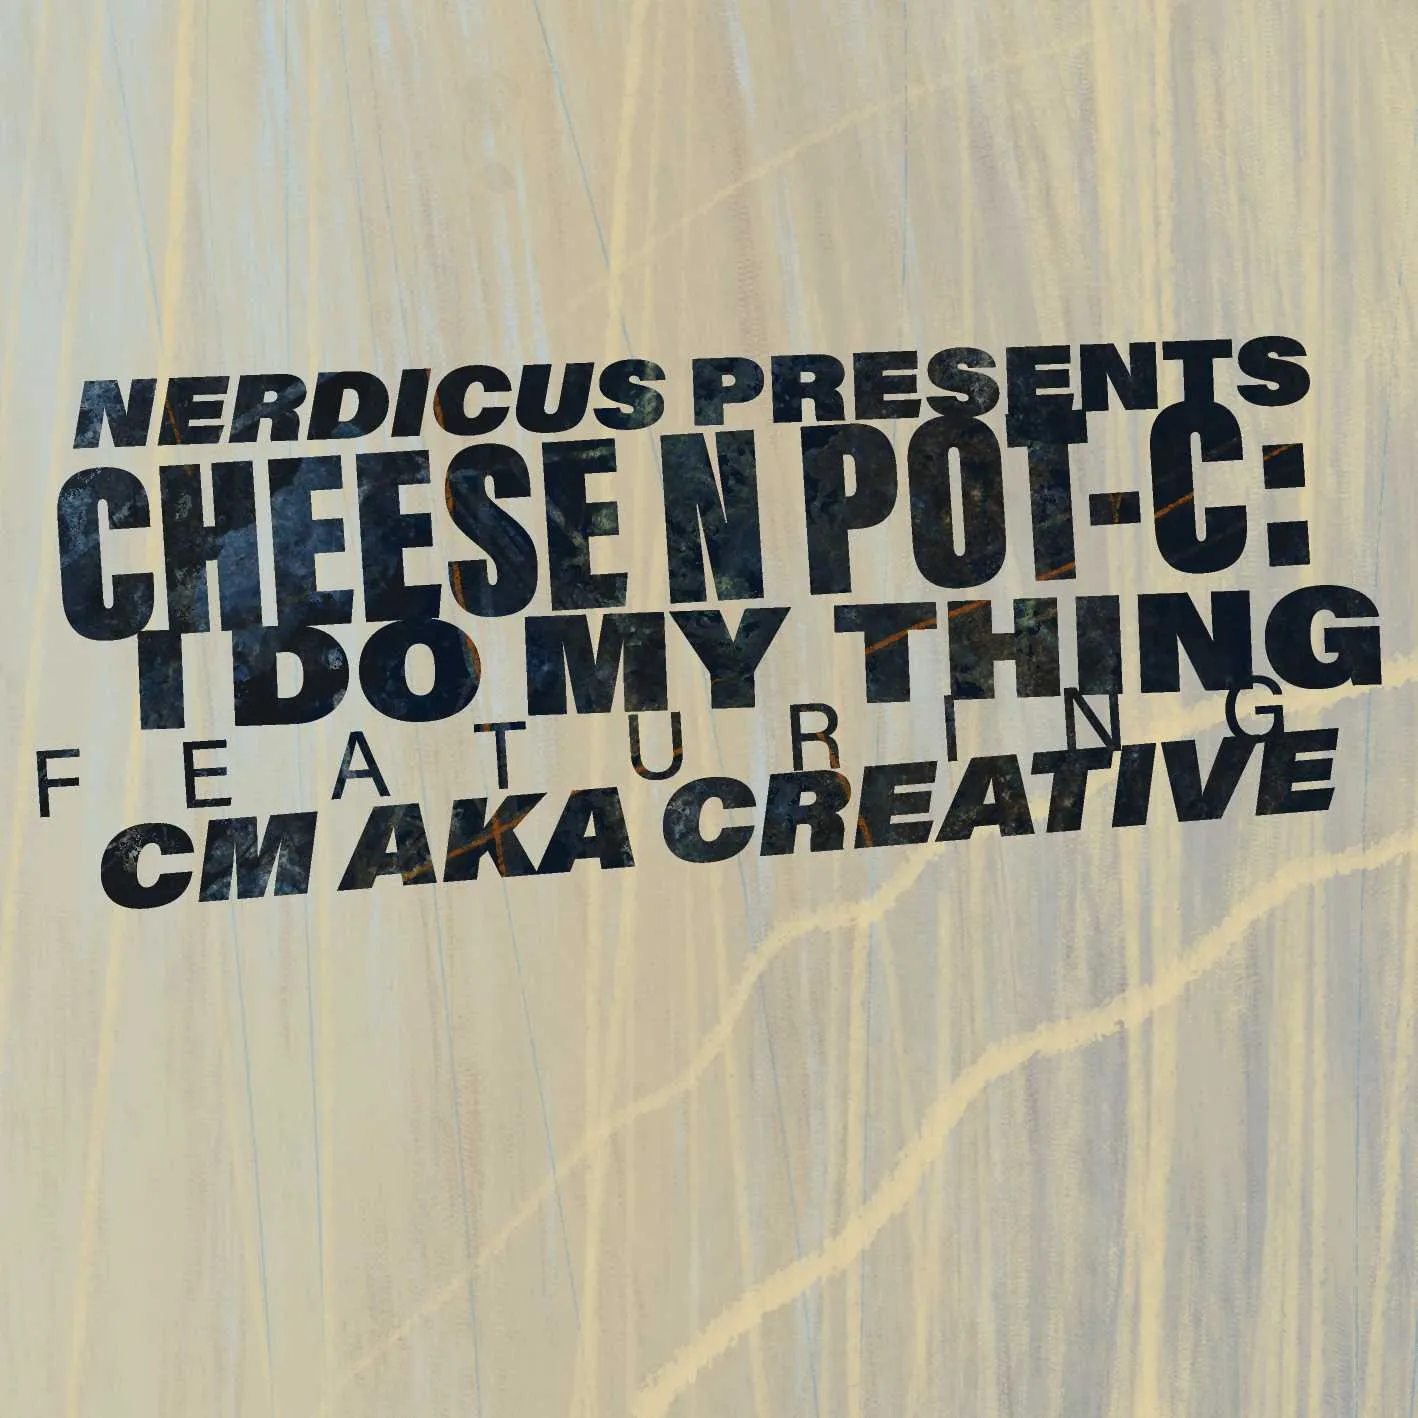 Album cover for “Nerdicus Presents Cheese N Pot-C: I Do My Thing (Featuring CM aka Creative)” by Cheese N Pot-C